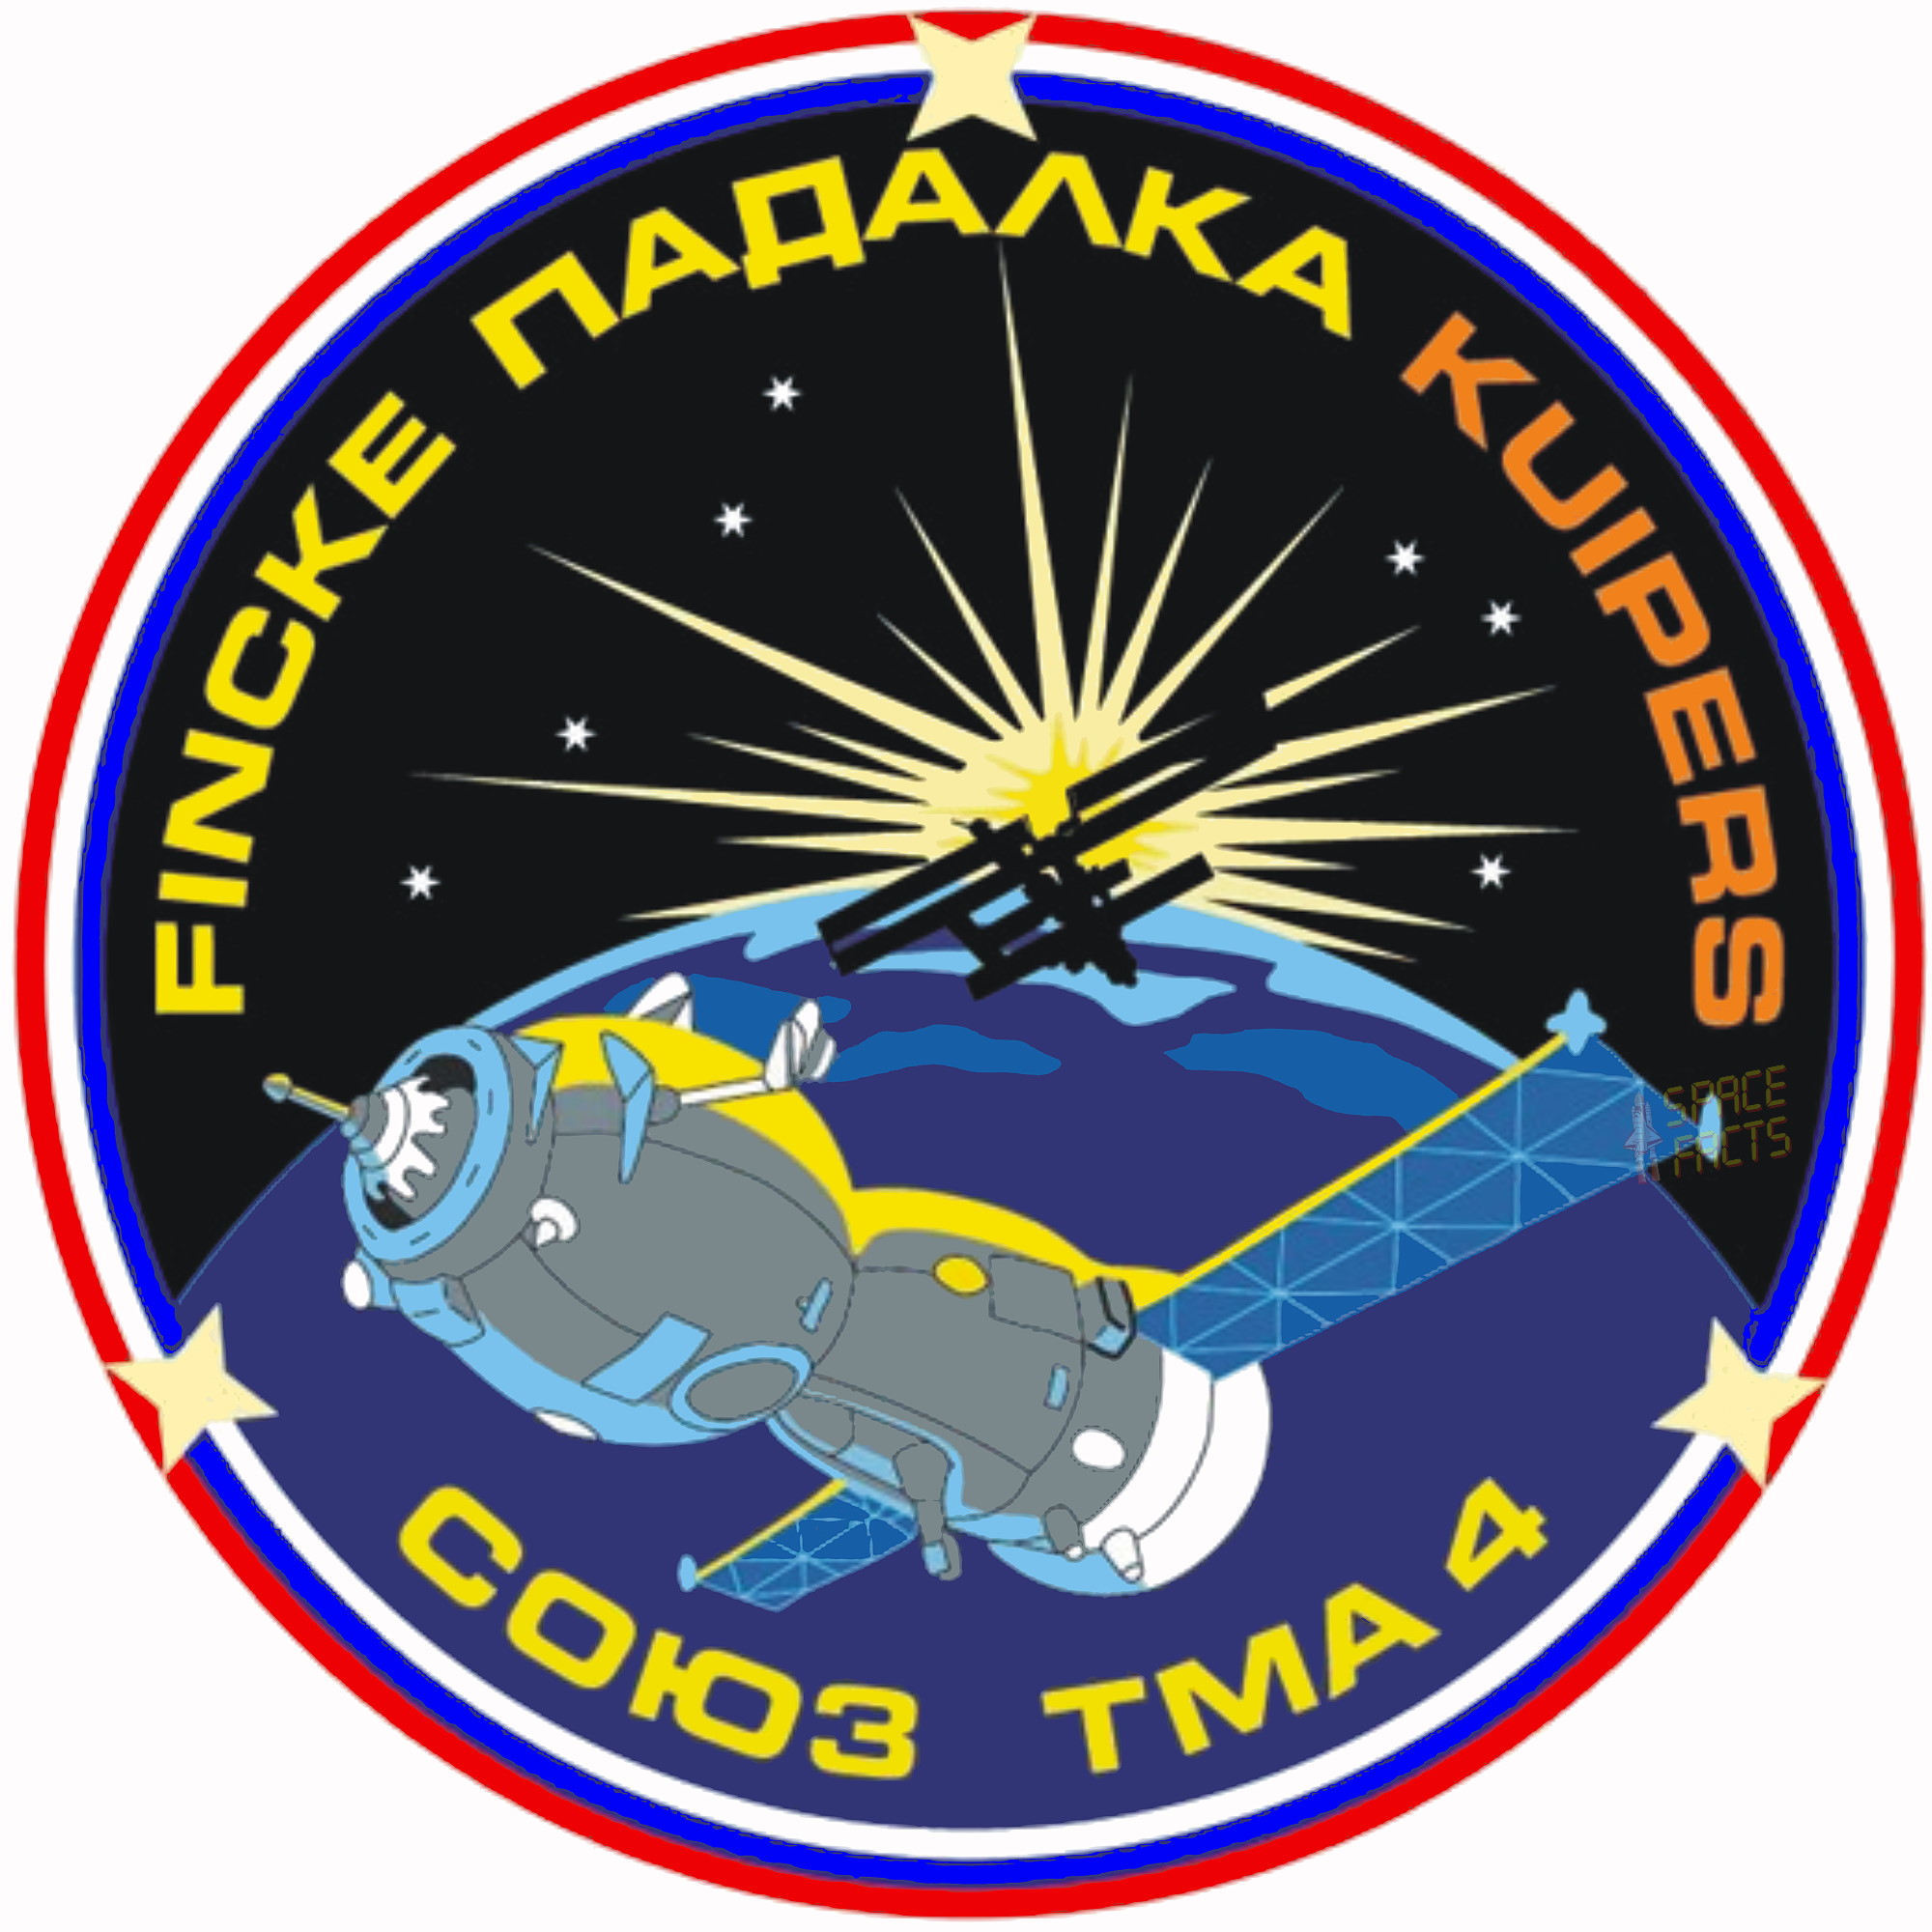 Human Space Flights Soyuz TMA-4 Altair Russia Patch 